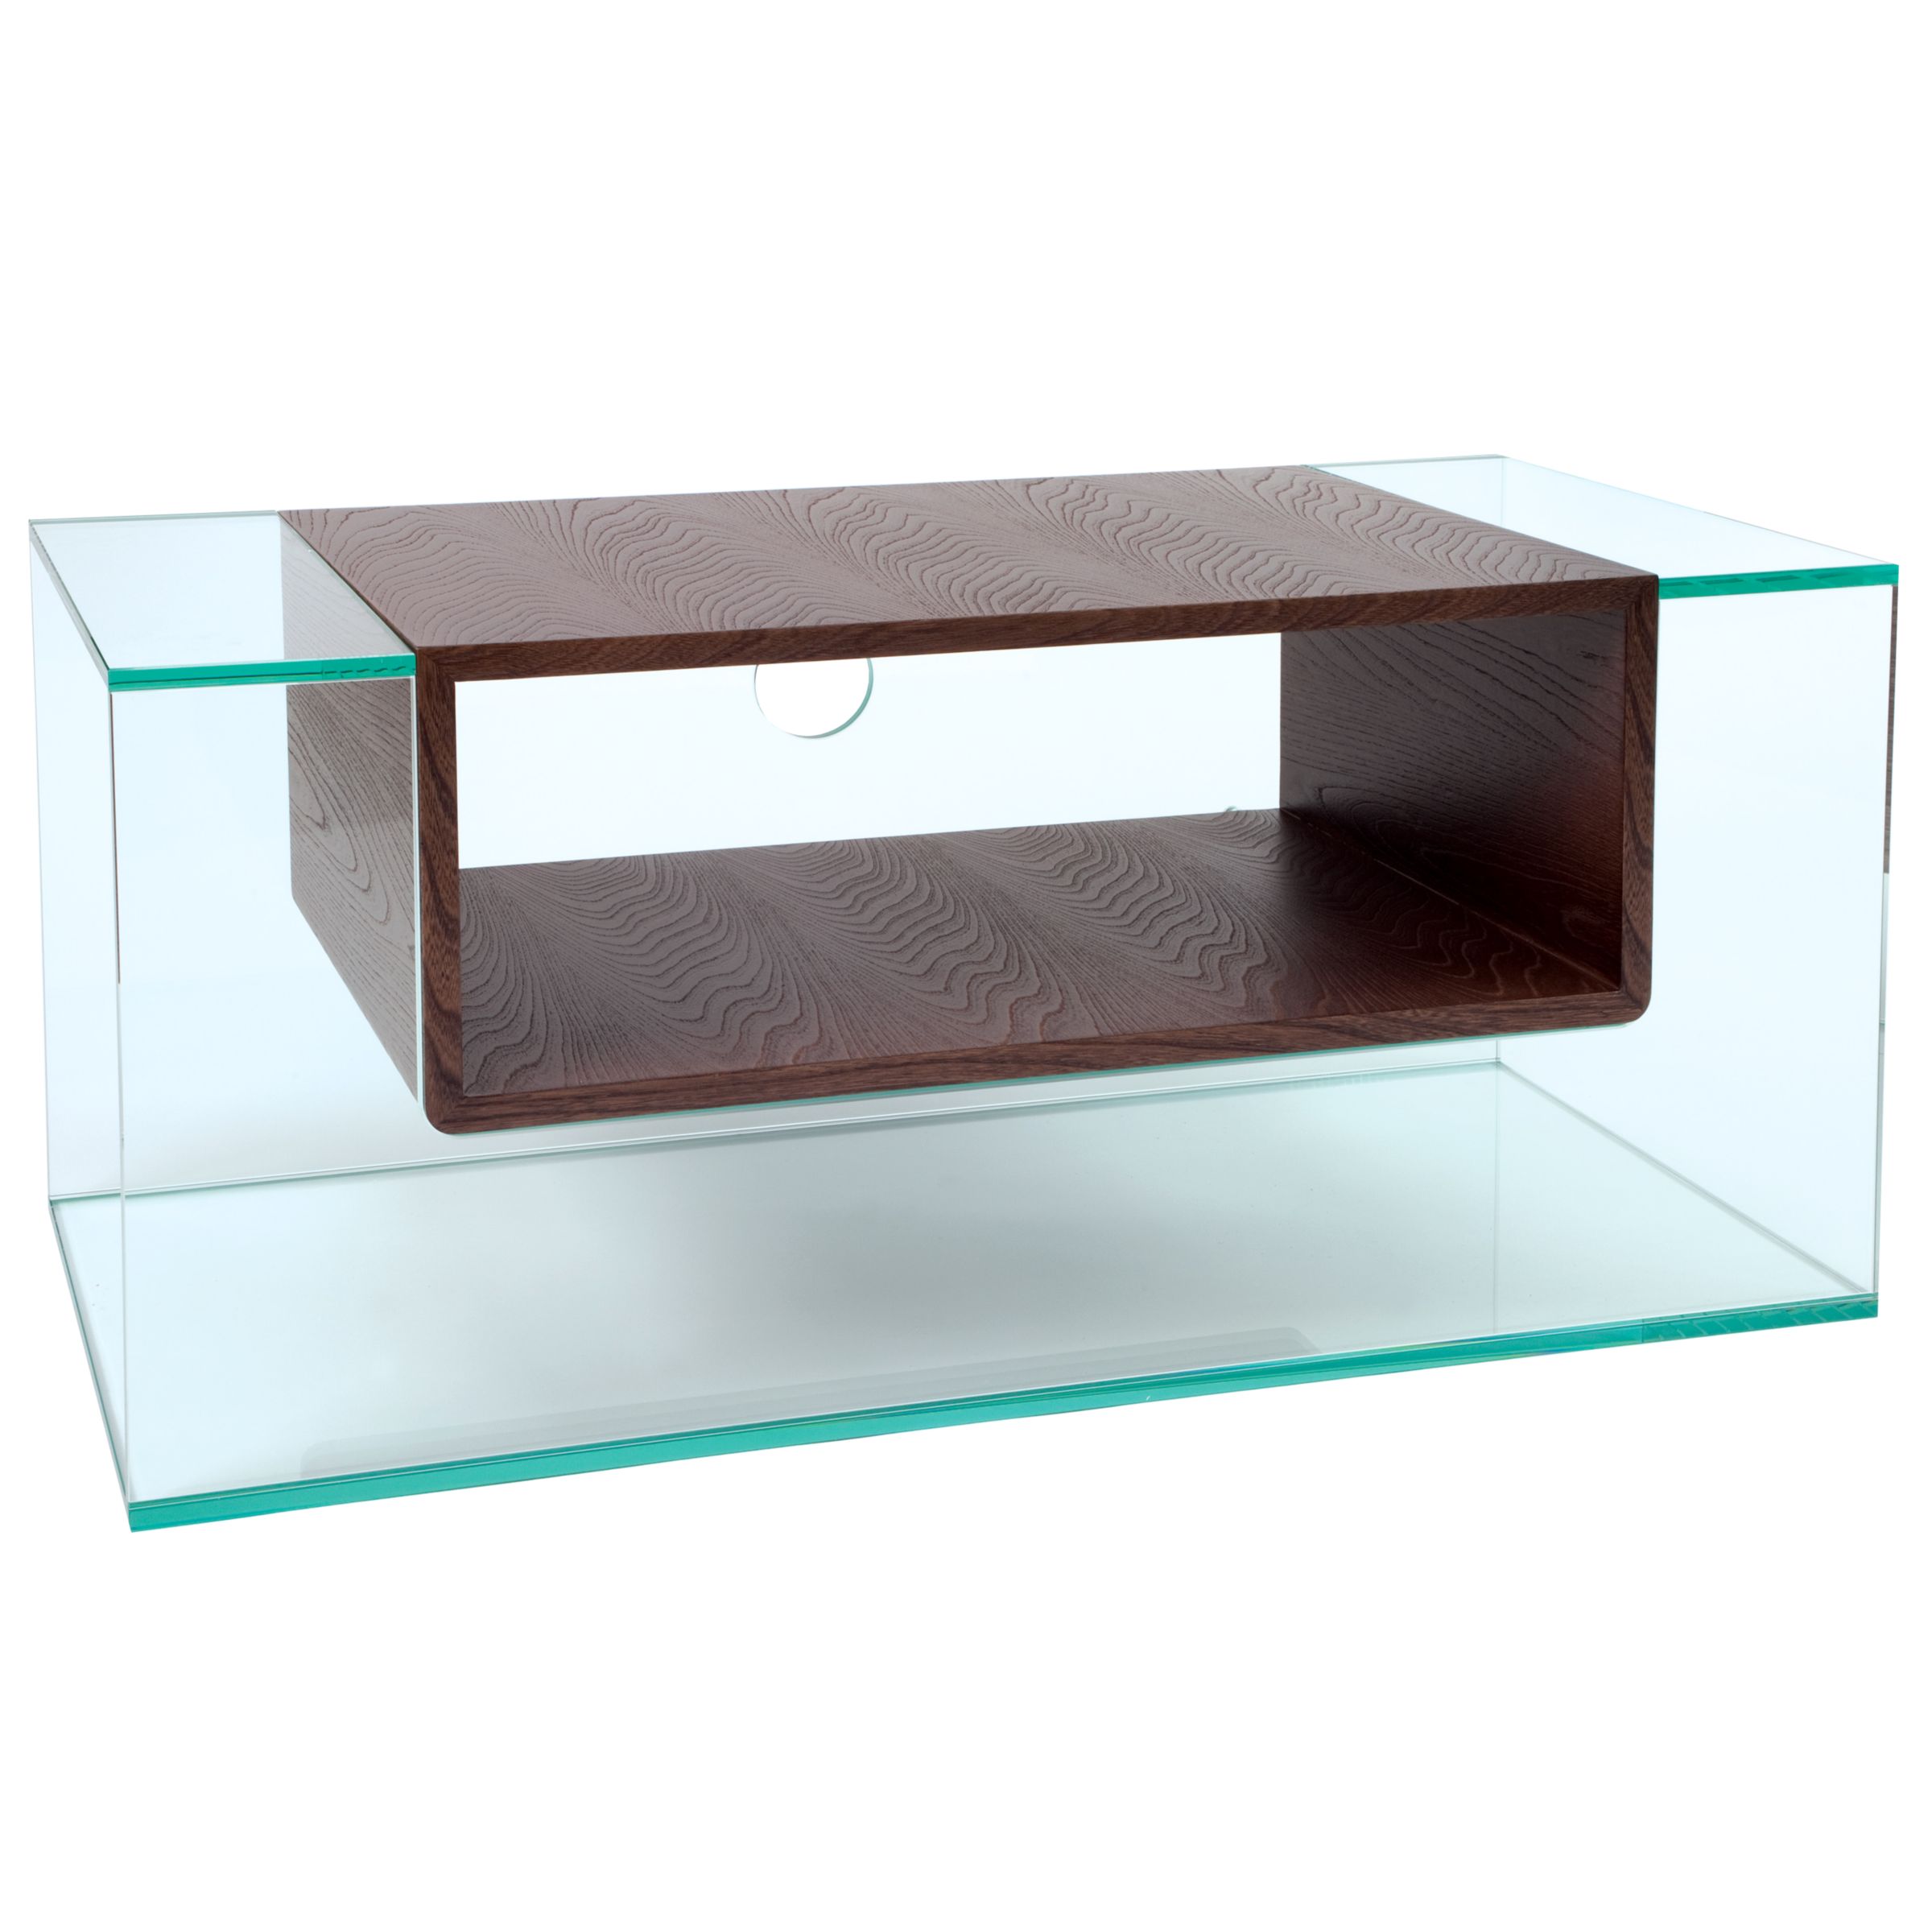 Greenapple Cliff GL59401 Television Stand, Wenge at John Lewis